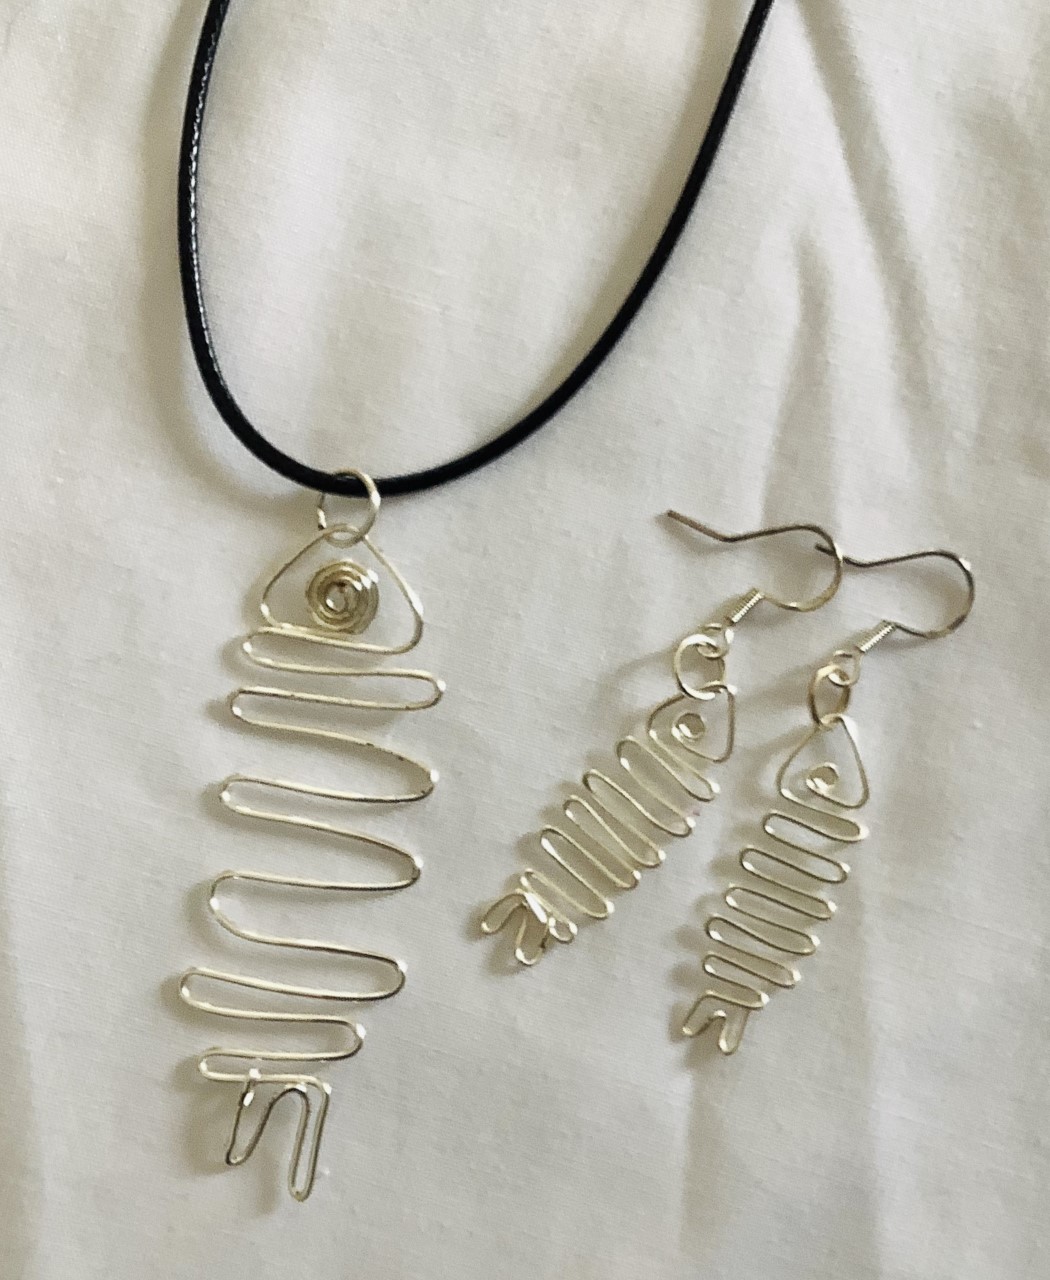 FISH Pendants and earrings.  Hand wired individually with in silver coated copper or aluminum wire.  $40.00 a set. Pieces can purchase the pendants and earring separately.